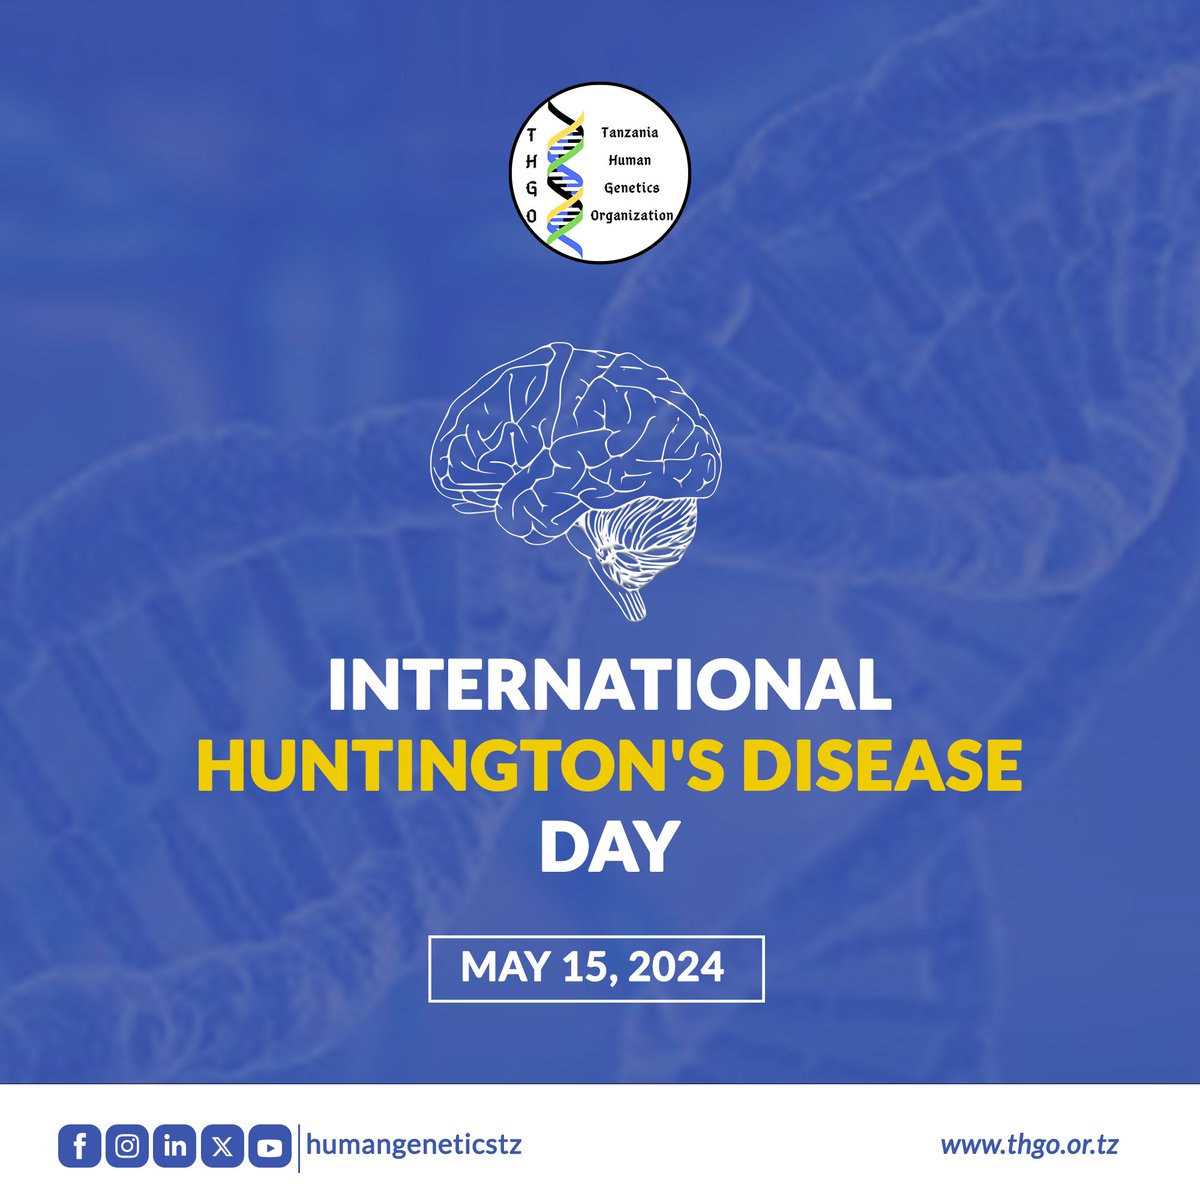 🌏 Today is #Huntington's Disease Awareness Day. 🎗️

🤝Let's join hands in learning about this neurological condition and how to manage it.

Content by @YahayaMoody
Artwork by @Iampeleka

#NeurologicalDiseases #HuntingtonsDisease #NonCommunicableDiseases #humangenetics